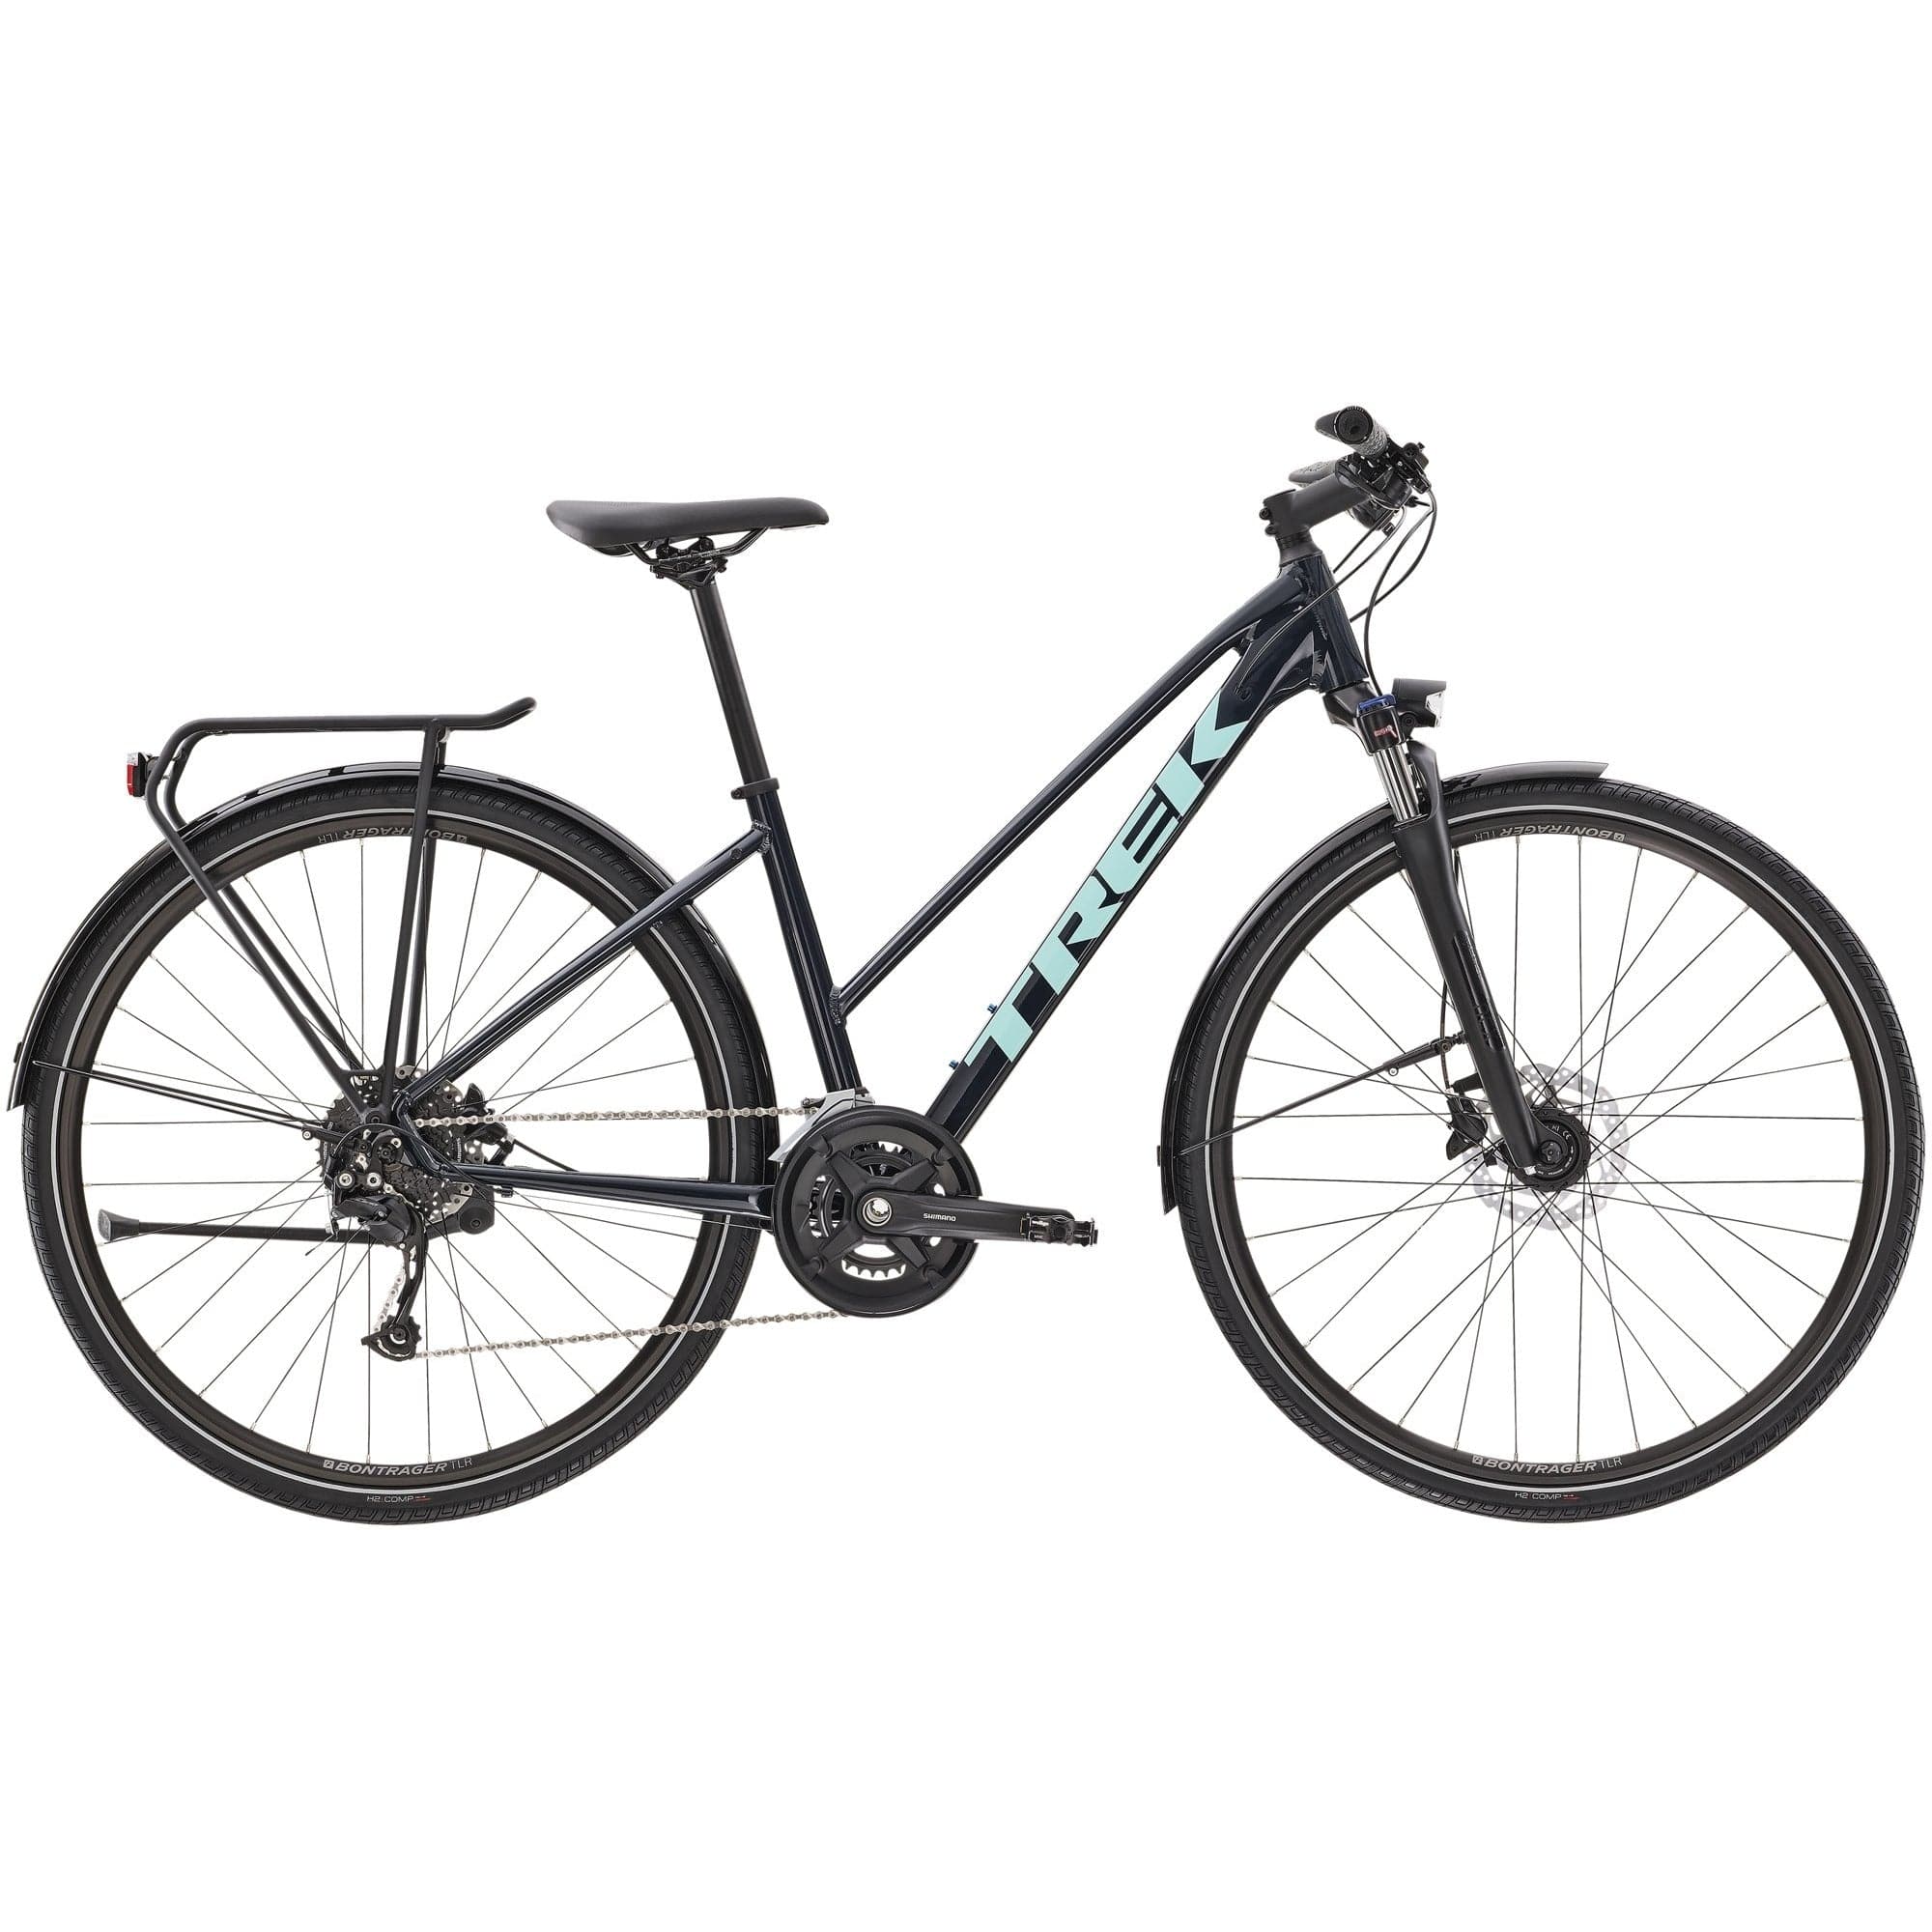 Trek Dual Sport 3 Equipped Stagger 2021 with a stagger frame, rack, mudguards and lights